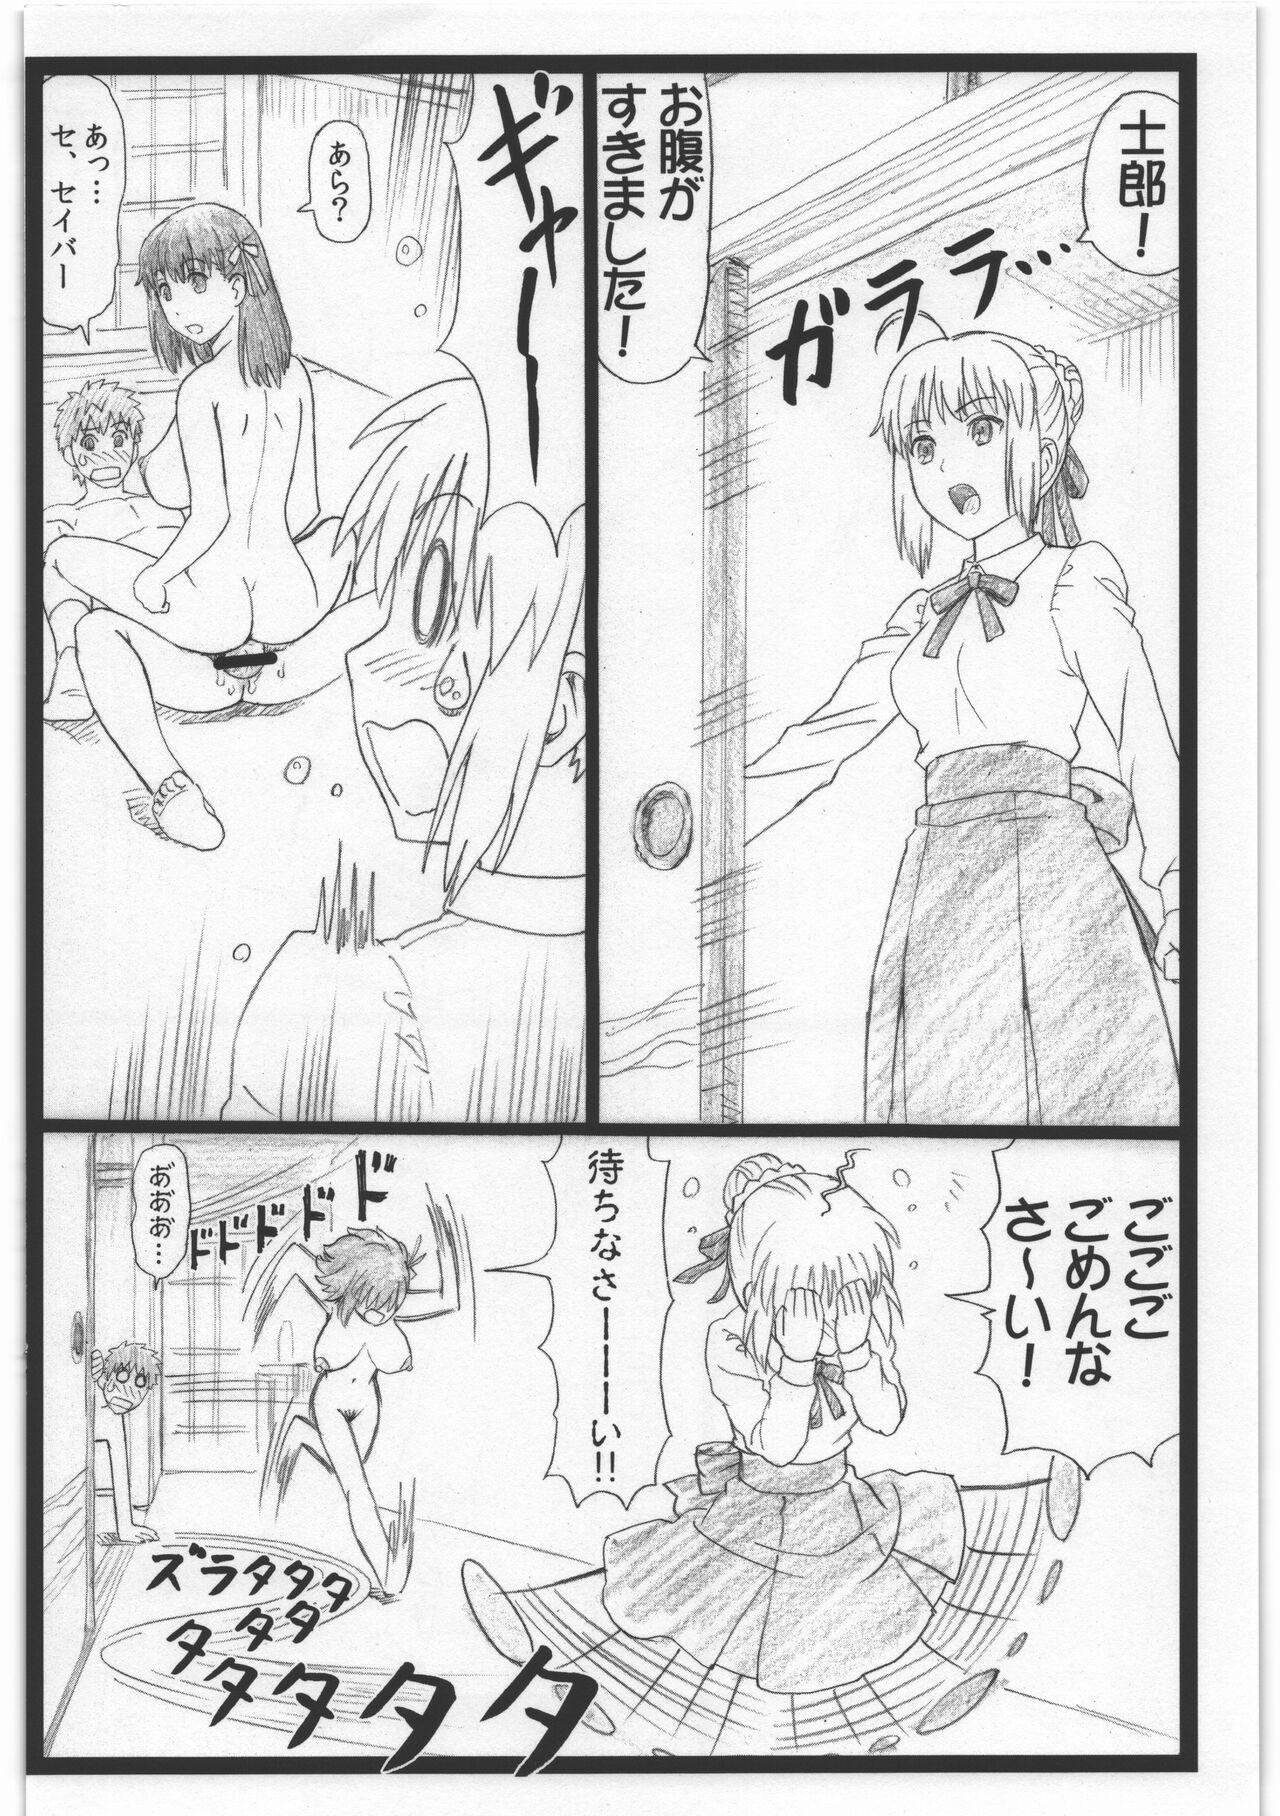 Throat C88 Omakebon - Fate stay night Arabe - Page 4